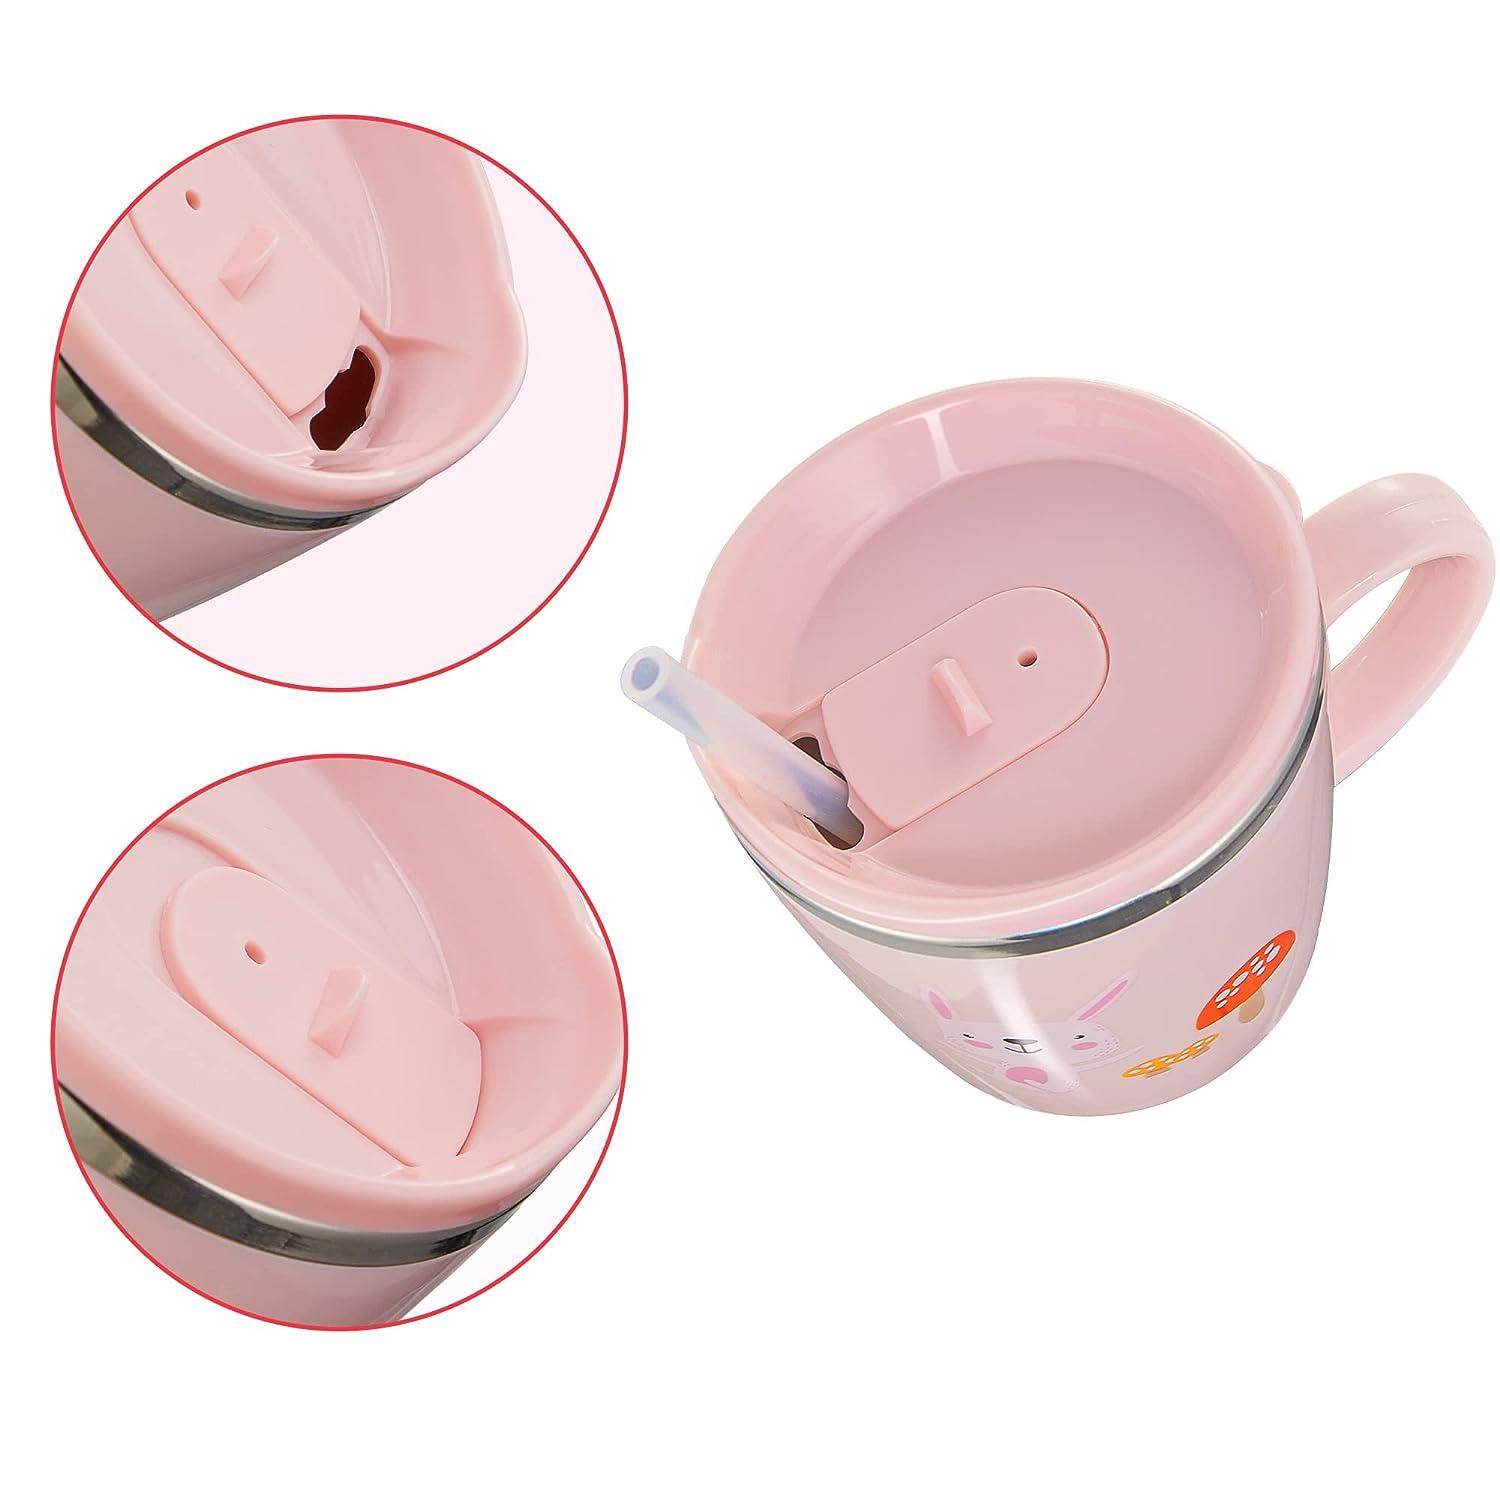  Valueder Baby Kids Toddler Sippy Cup Mug for Milk, Coffee,  Stainless Steel Trainer Straw Cup with Lid, Fox, 7oz/Pink : Baby